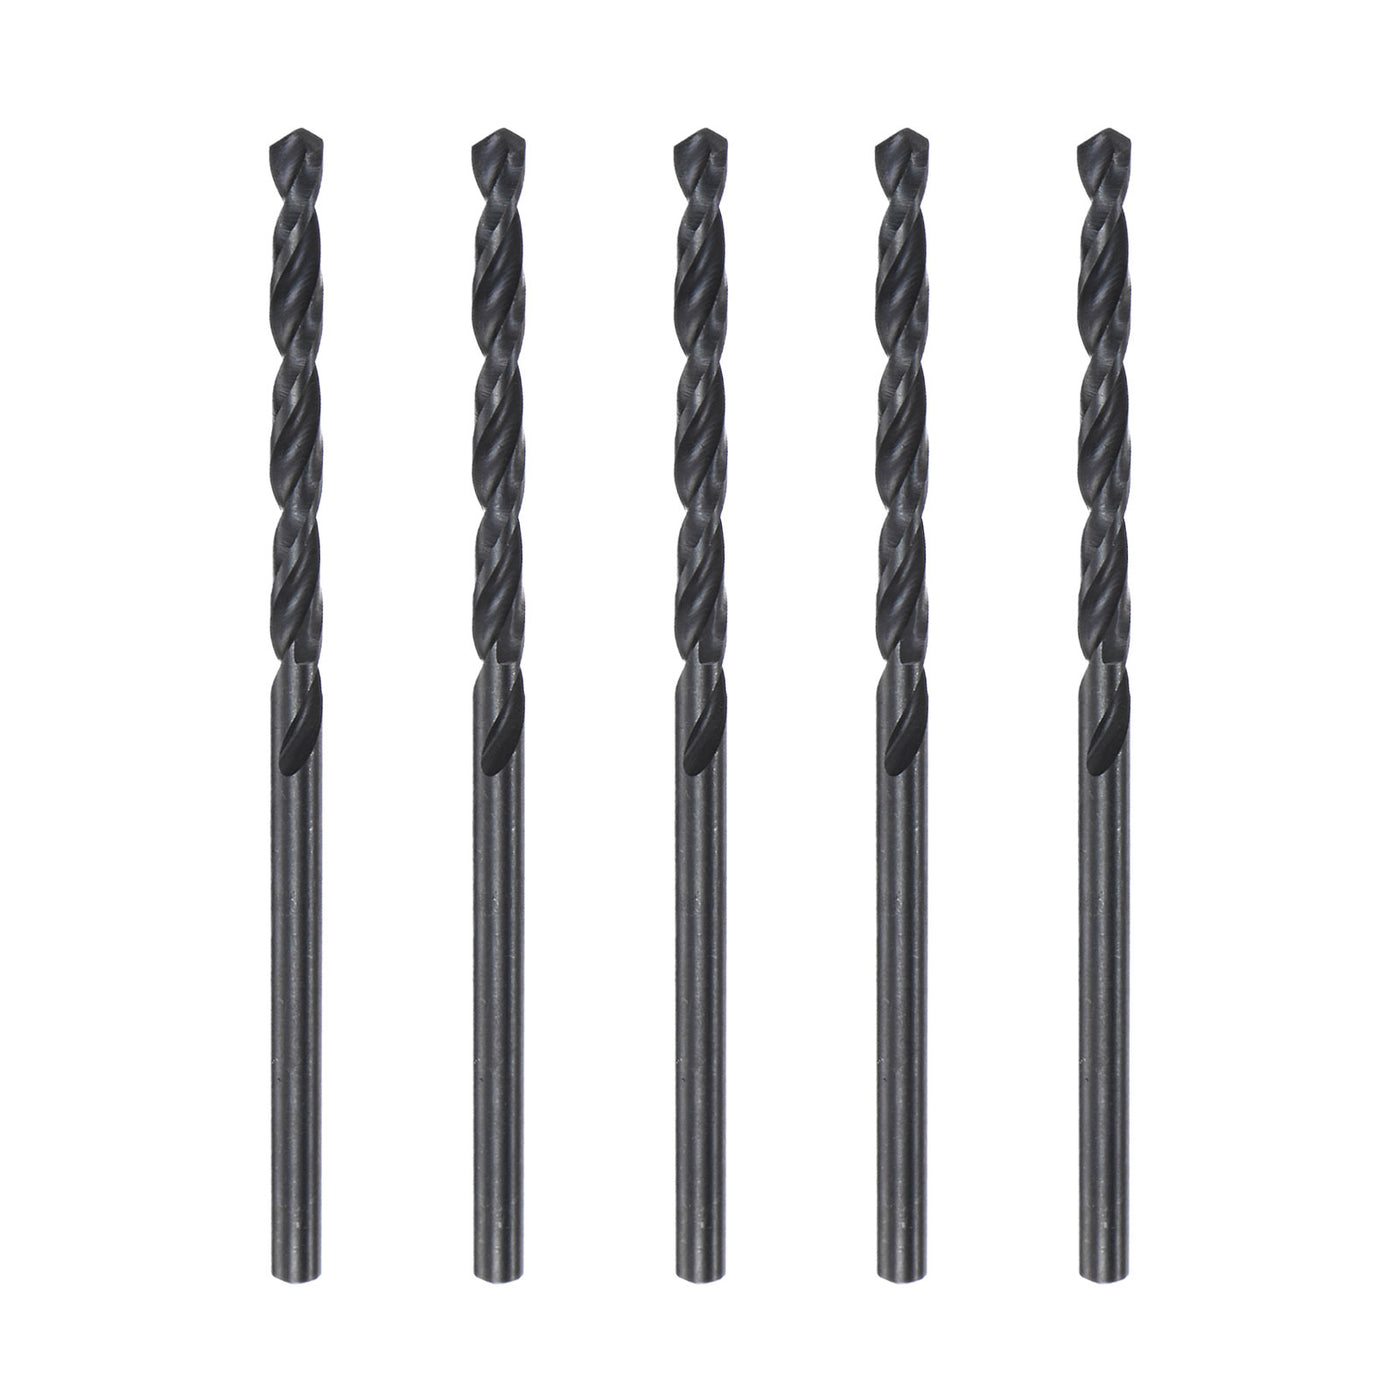 uxcell Uxcell High Speed Steel Twist Drill Bit, 2.7mm Fully Ground Black Oxide 61mm Long 5Pcs